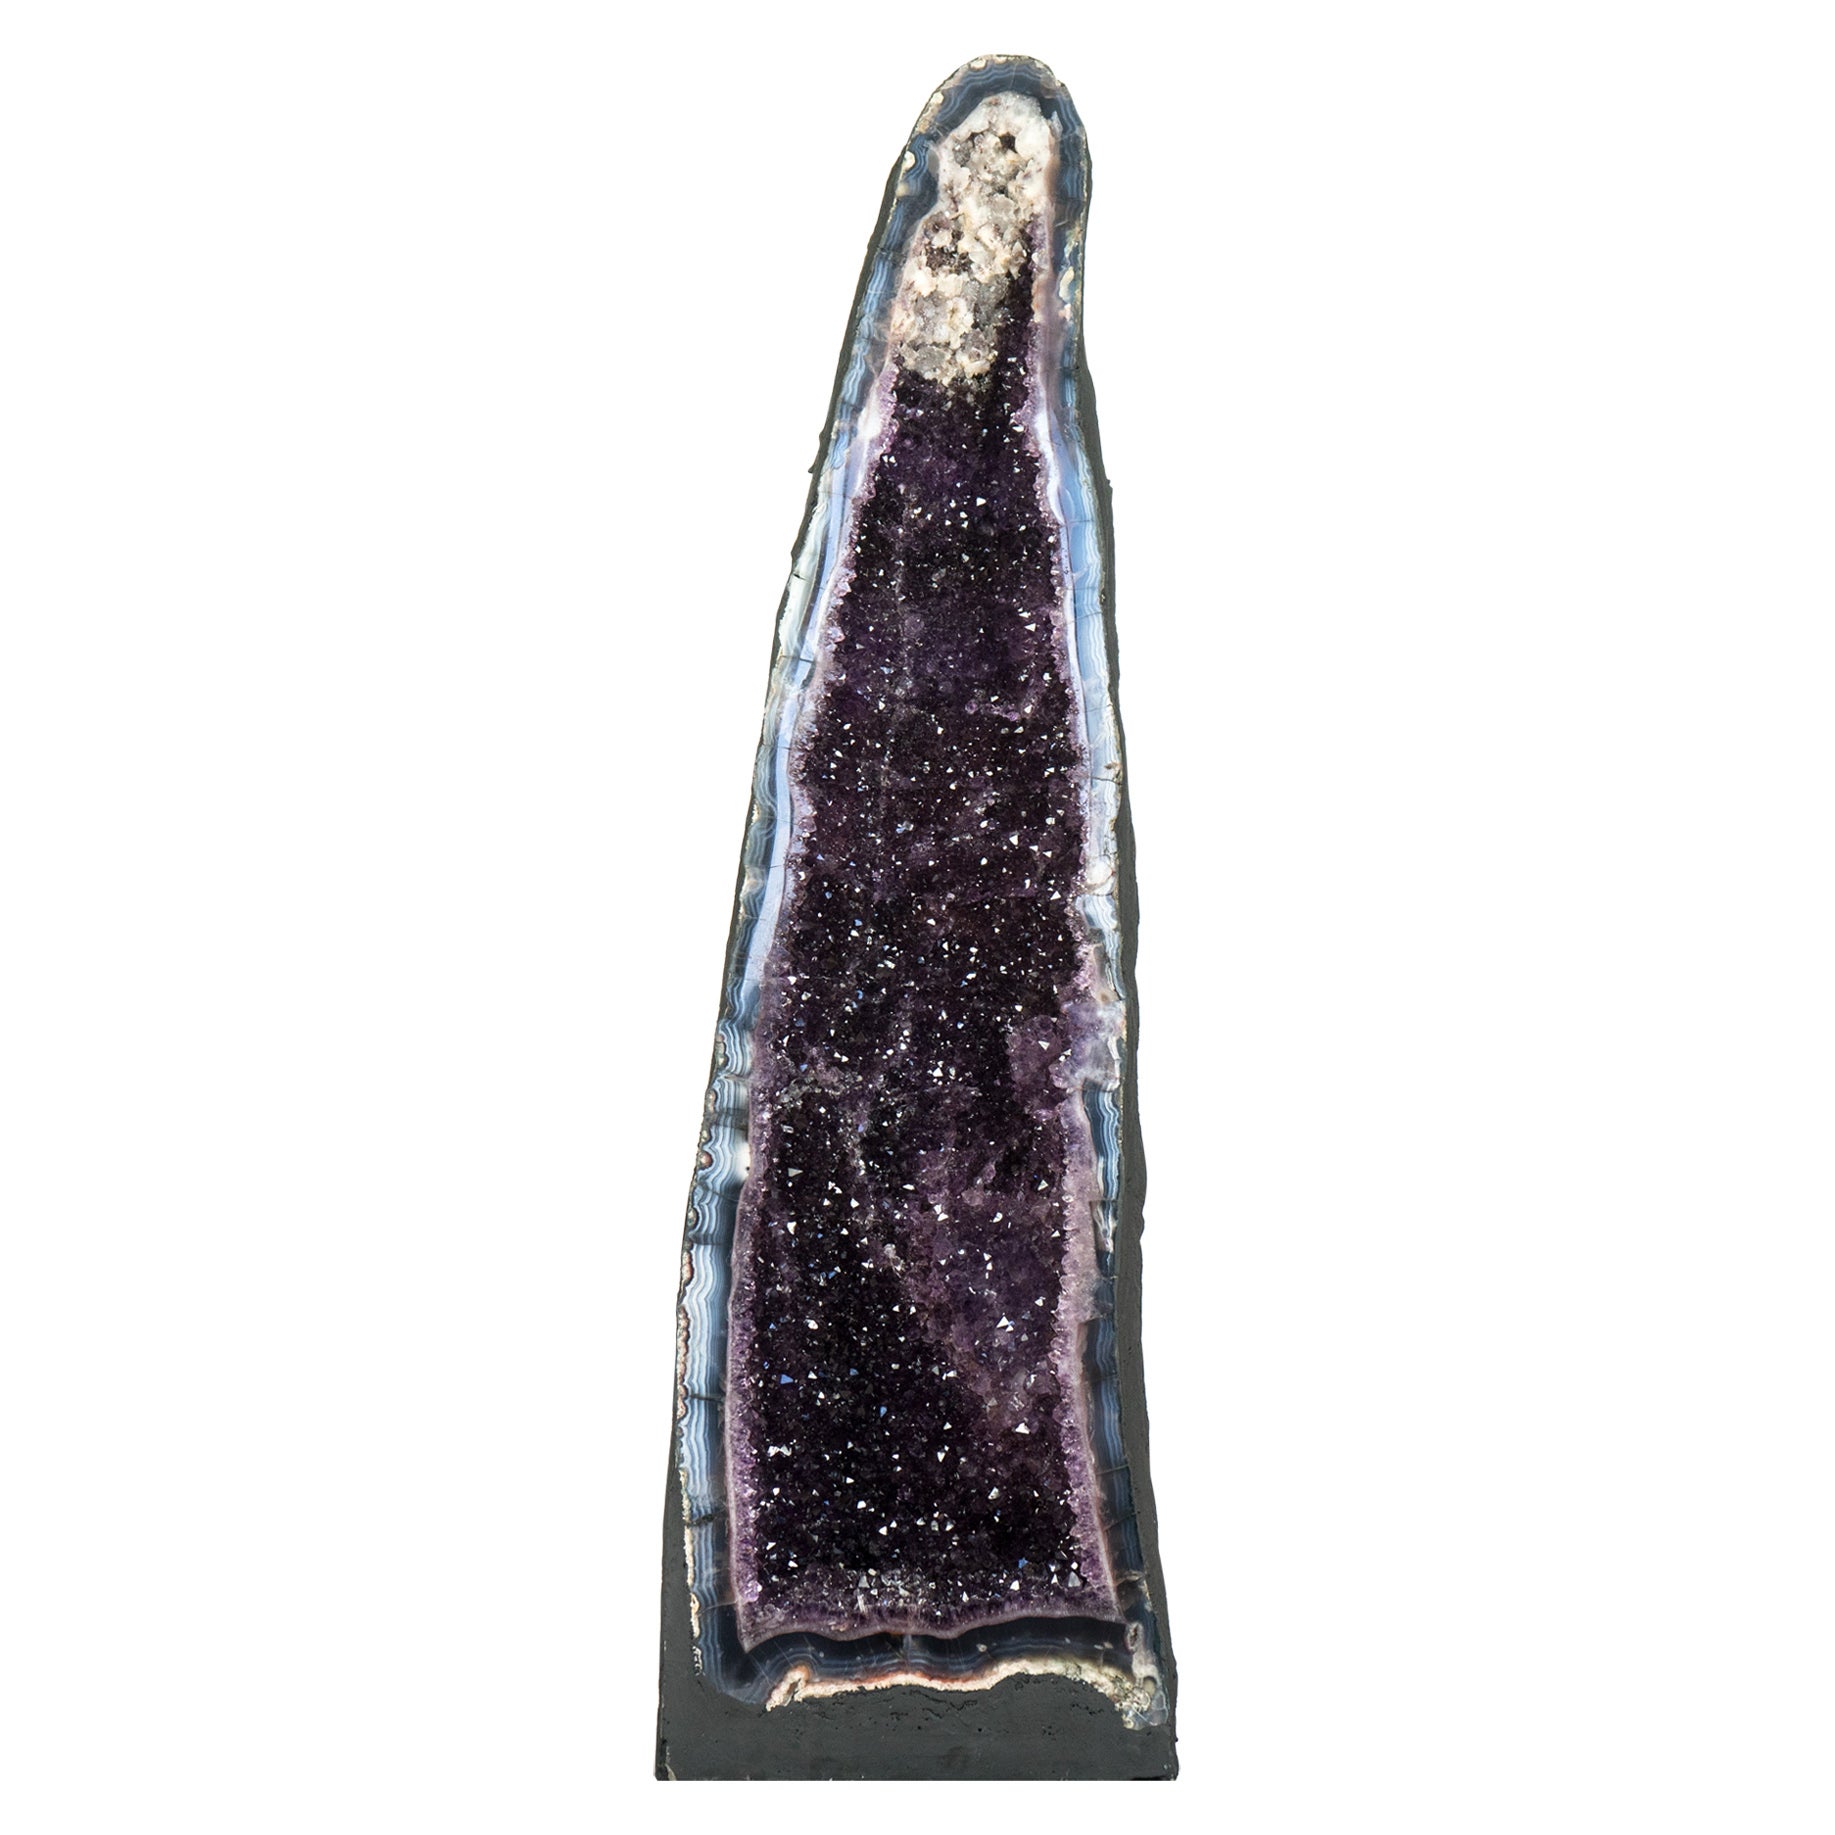 Deep Purple Amethyst Cathedral Geode, with Lace Agate and Calcite, Large & Tall For Sale